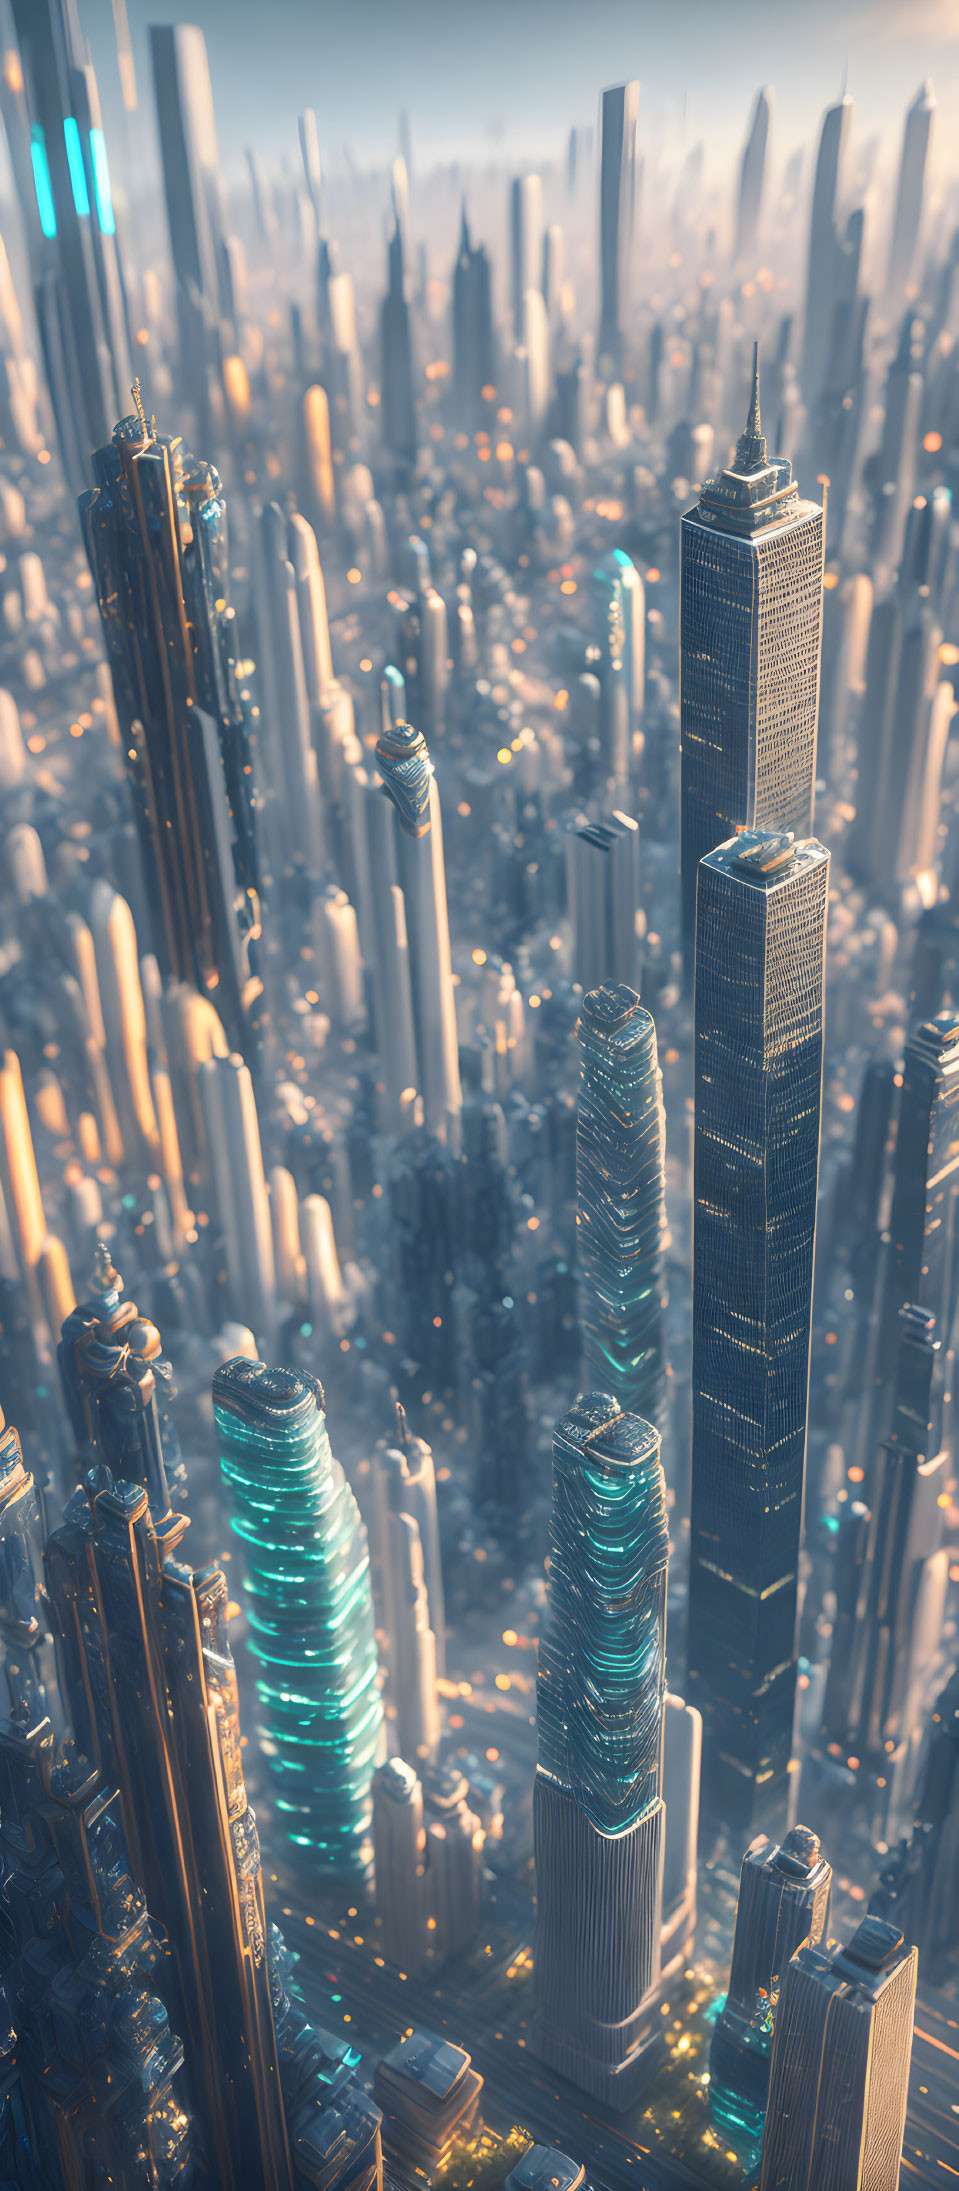 Golden-lit futuristic cityscape with towering skyscrapers